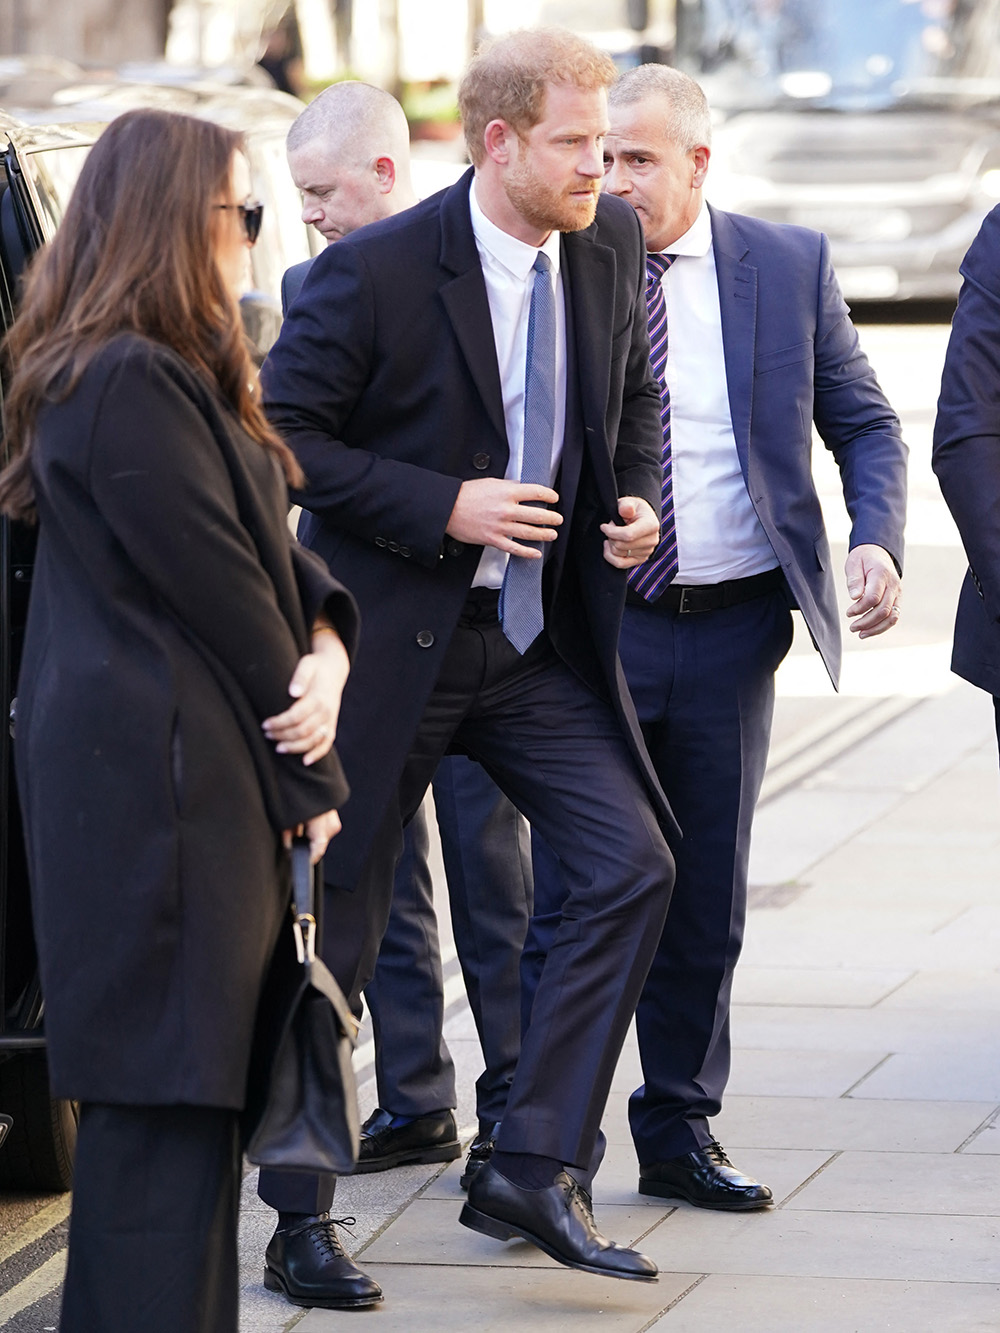 Prince Harry arrives at the High Court for his case against The Daily Mail. Material is to be credited 'News Licensing' unless otherwise agreed. 100% surcharge s 'he is uncredited. Online rights must be licensed separately. One time use only subject to agreement with News Licensing. 27th March 2023 Pictured: Prince Harry arrives at the High Court for his case against The Daily Mail. Material must be credited 